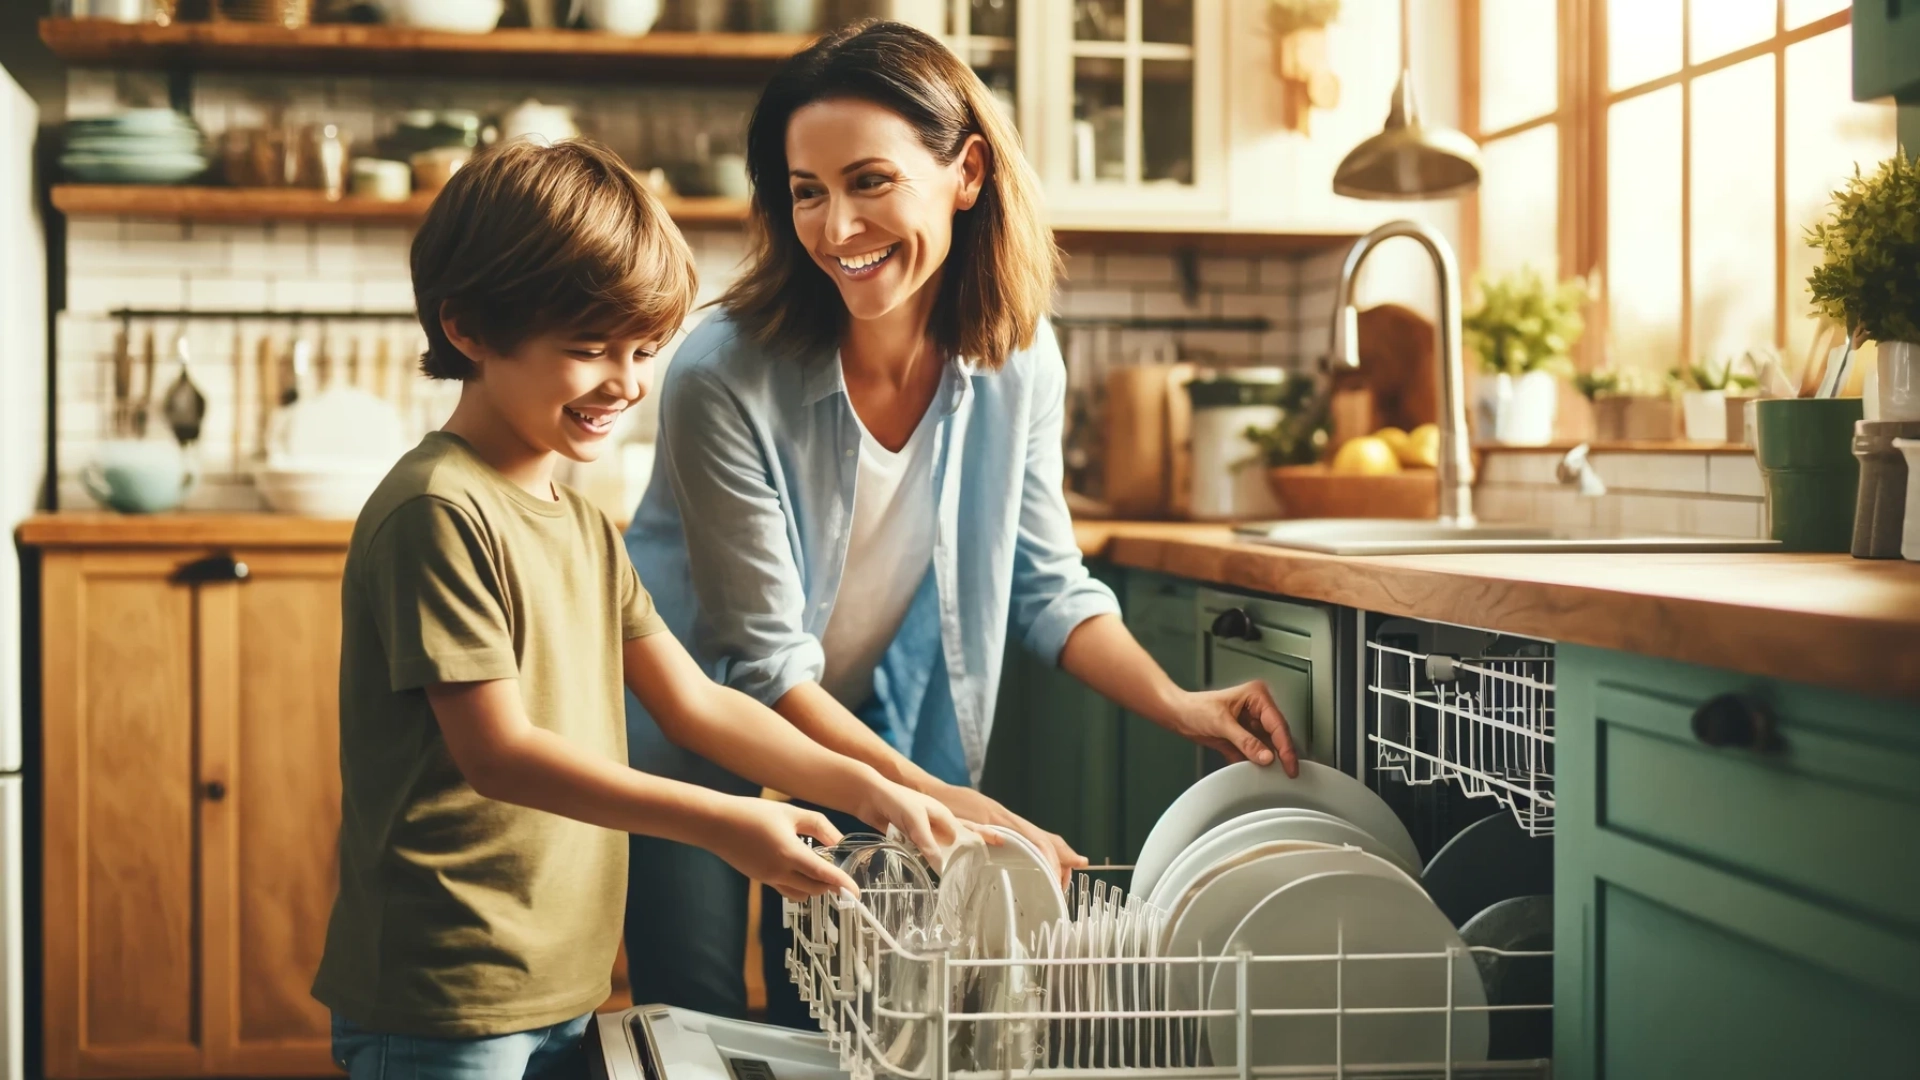 A mother and her son share a happy moment together as they load the dishwasher in their cozy kitchen.